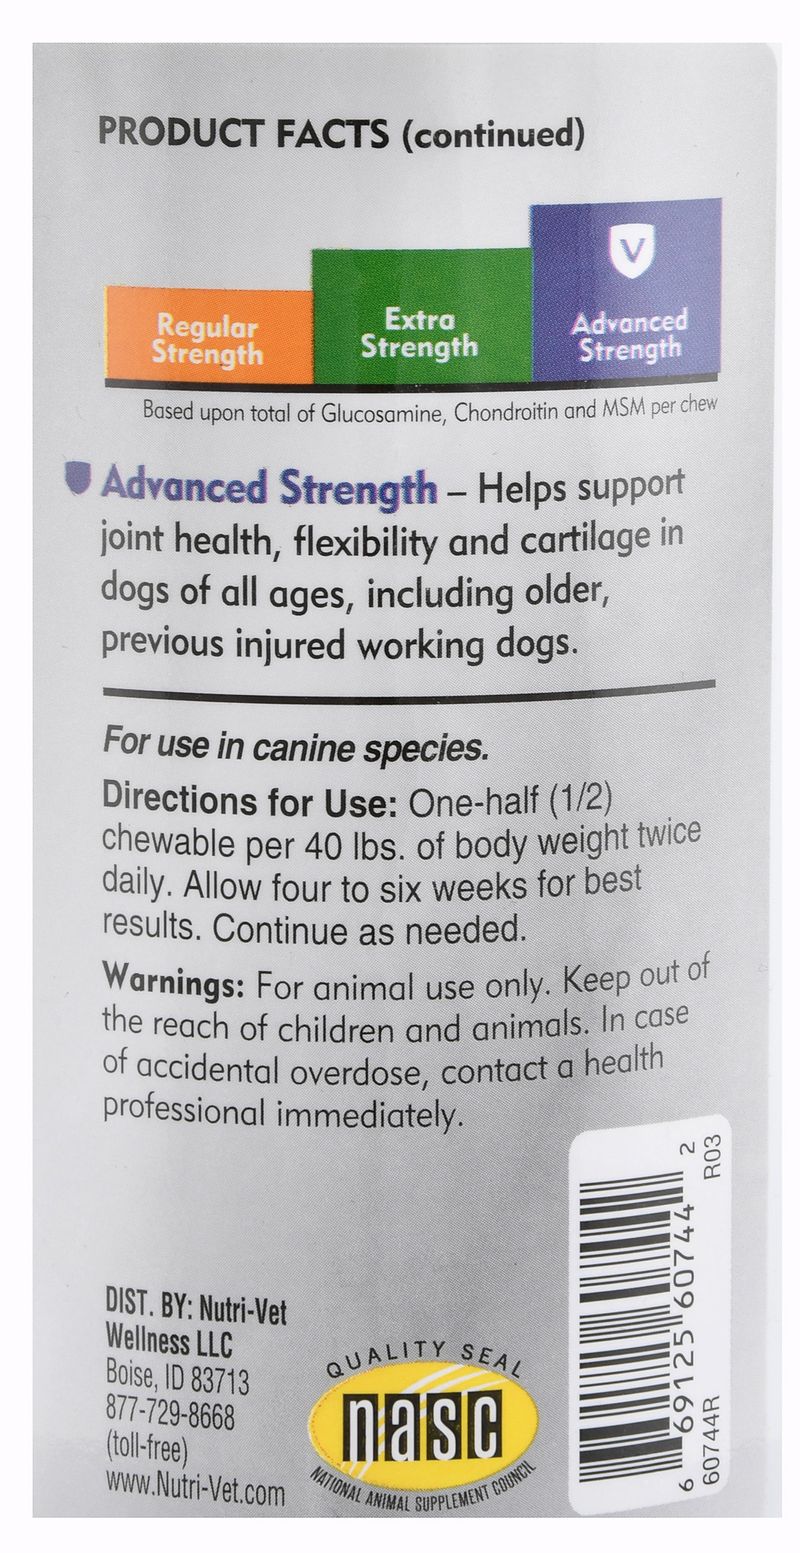 300-count-Nutri-Vet-Hip---Joint-Advanced-Strength-for-Dogs